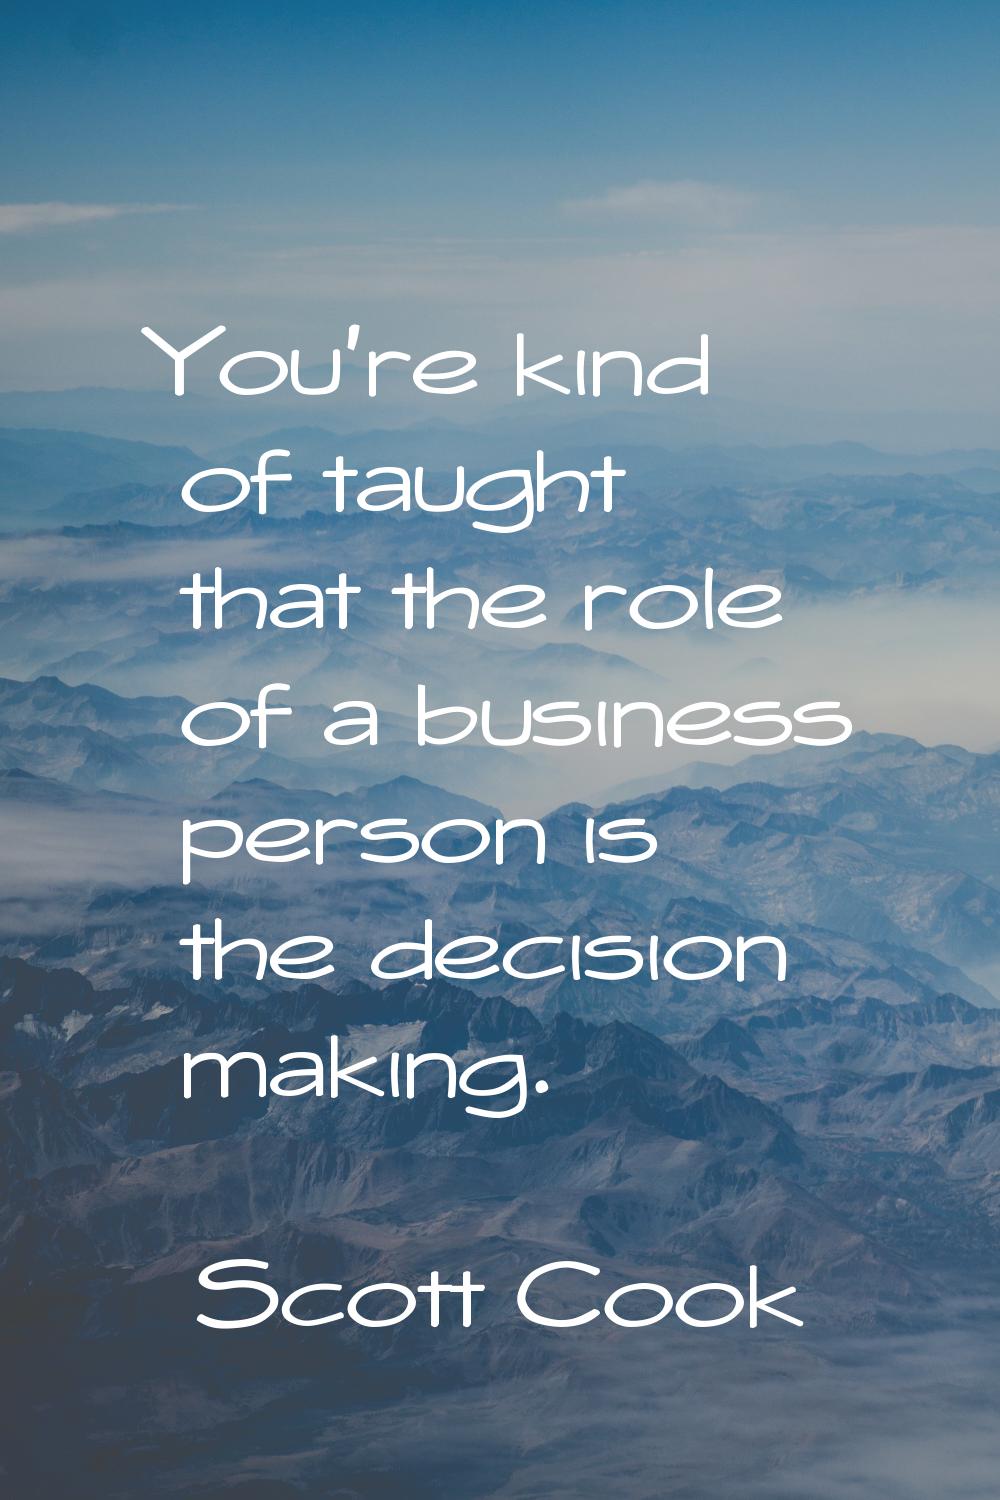 You're kind of taught that the role of a business person is the decision making.